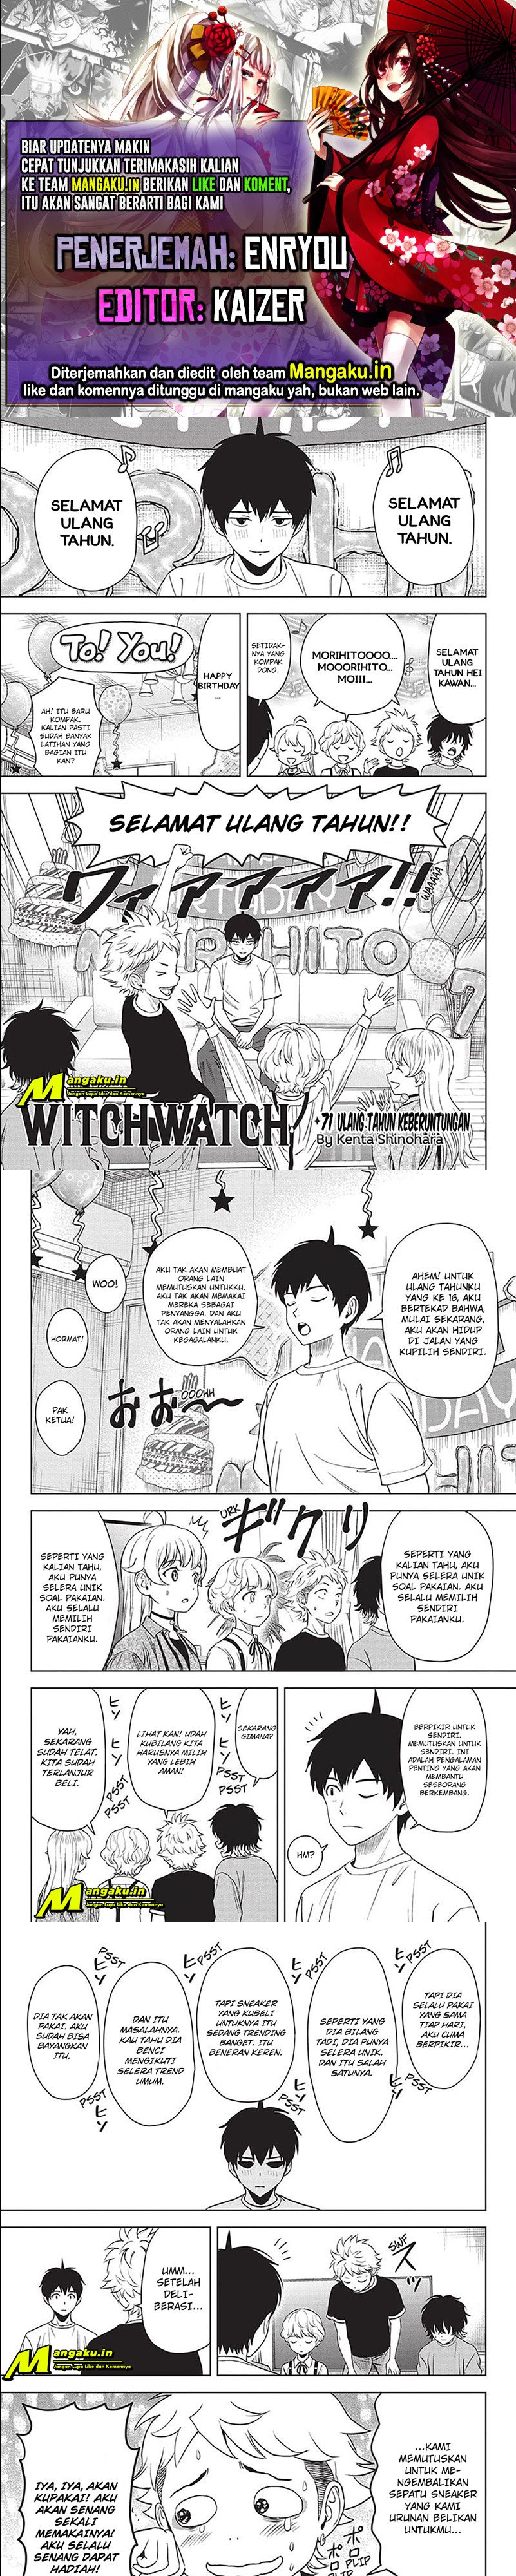 Witch Watch Chapter 71 1